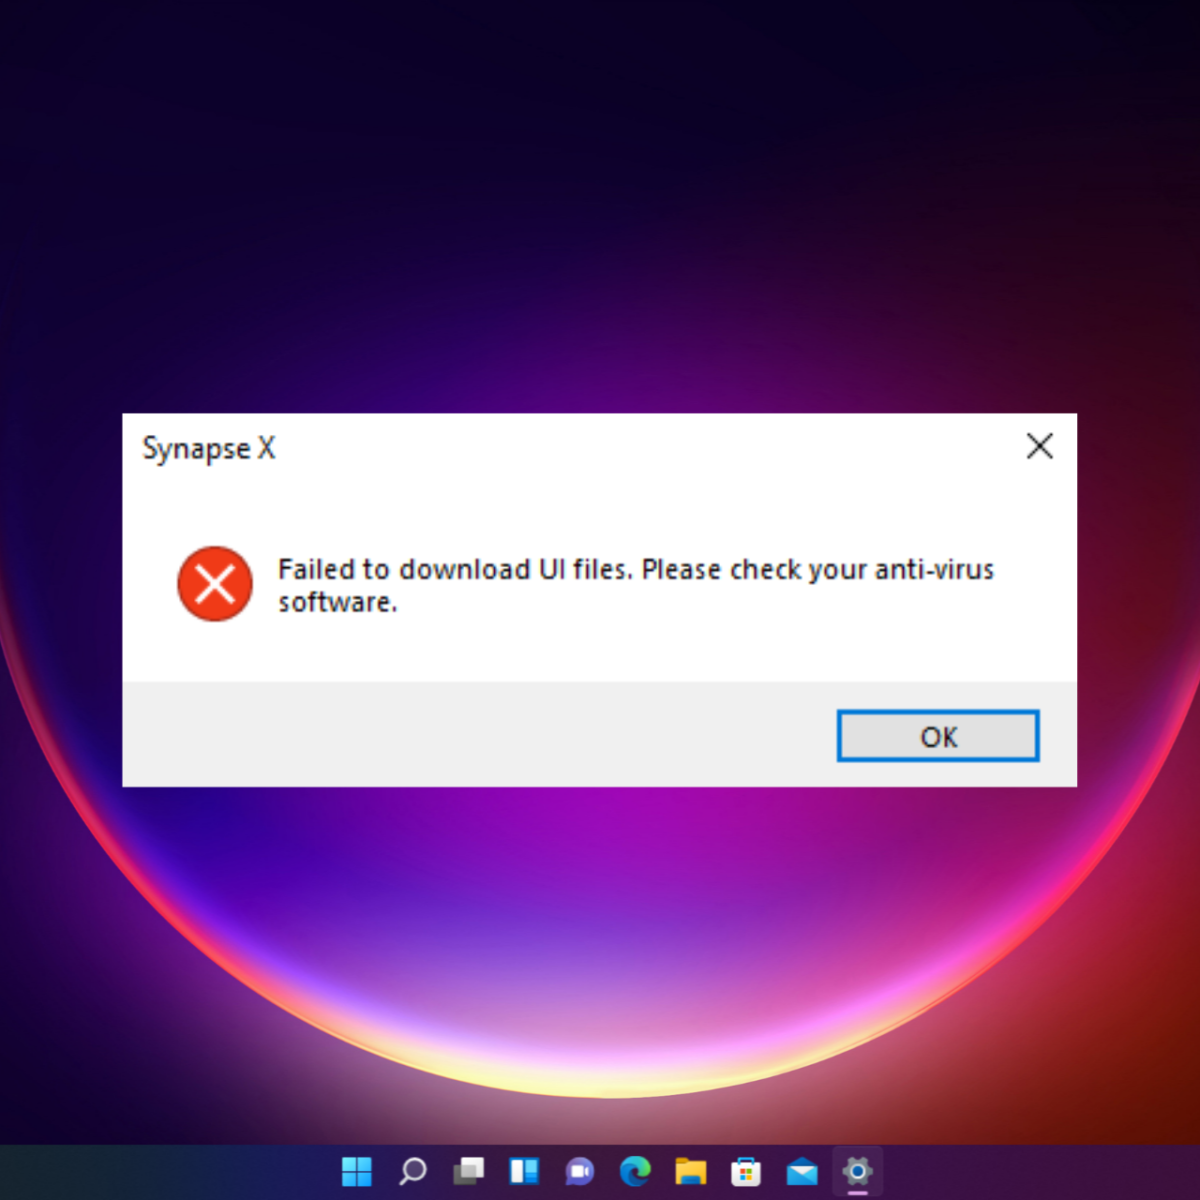 Synapse X Failed to Download UI Files: How to Fix It